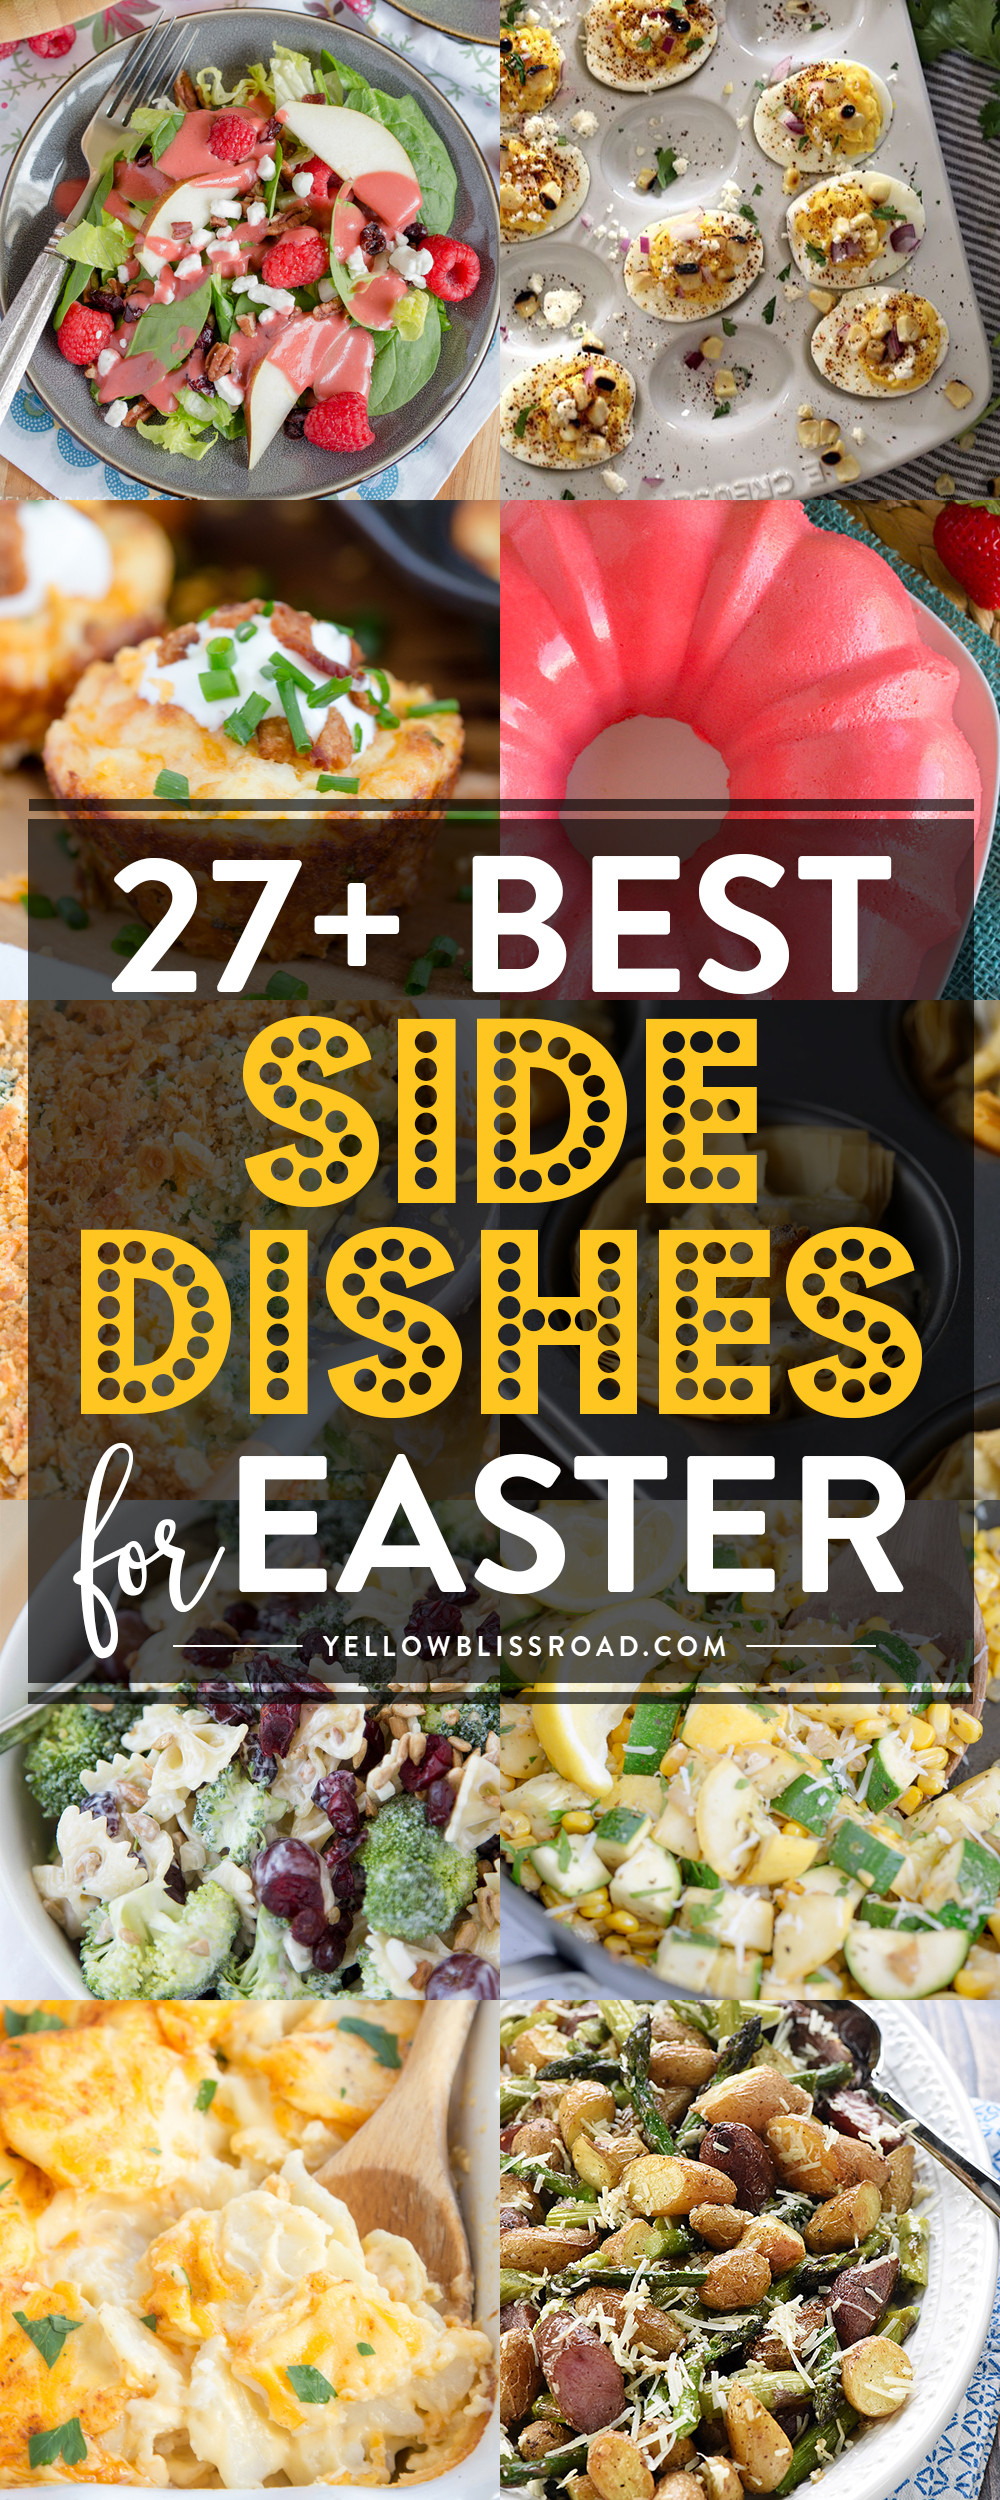 Best Easter Side Dishes
 Easter Side Dishes More than 50 of the Best Sides for